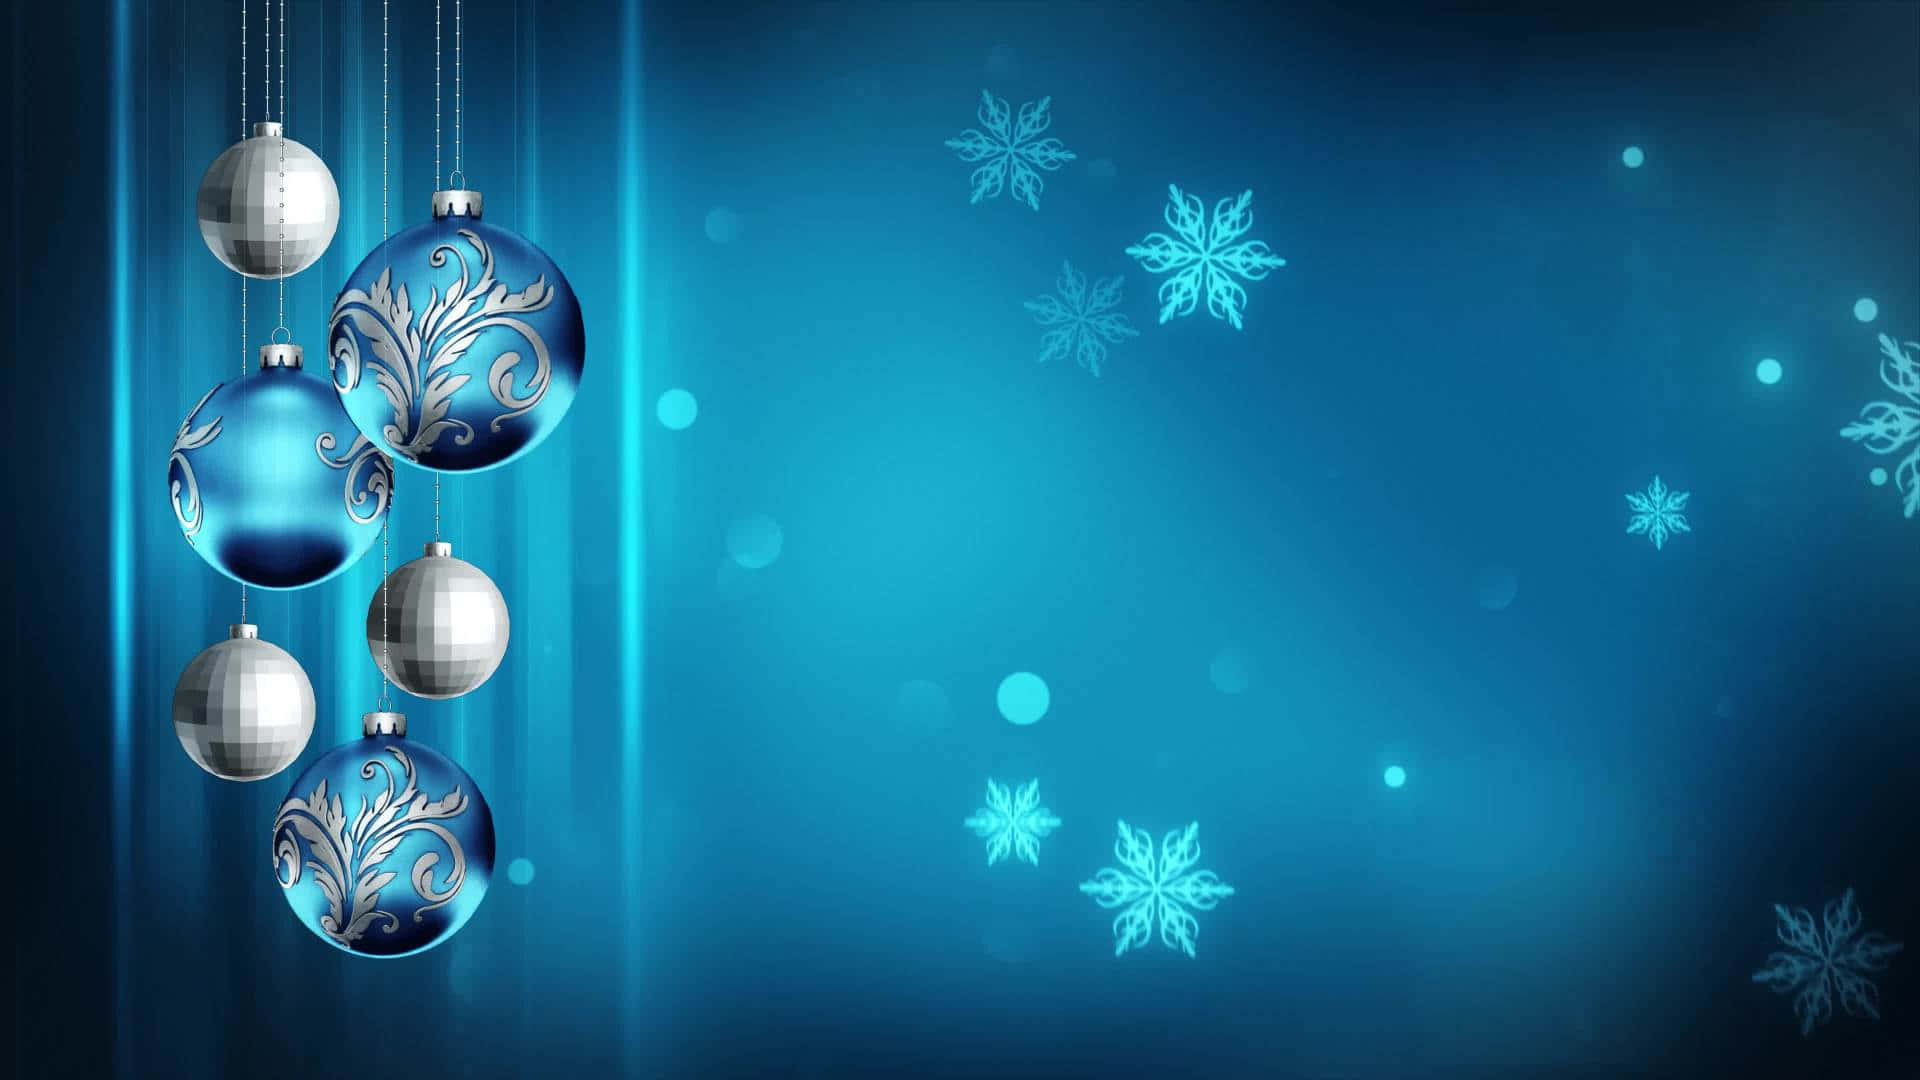 Celebrate Christmas with beautiful blue colors!